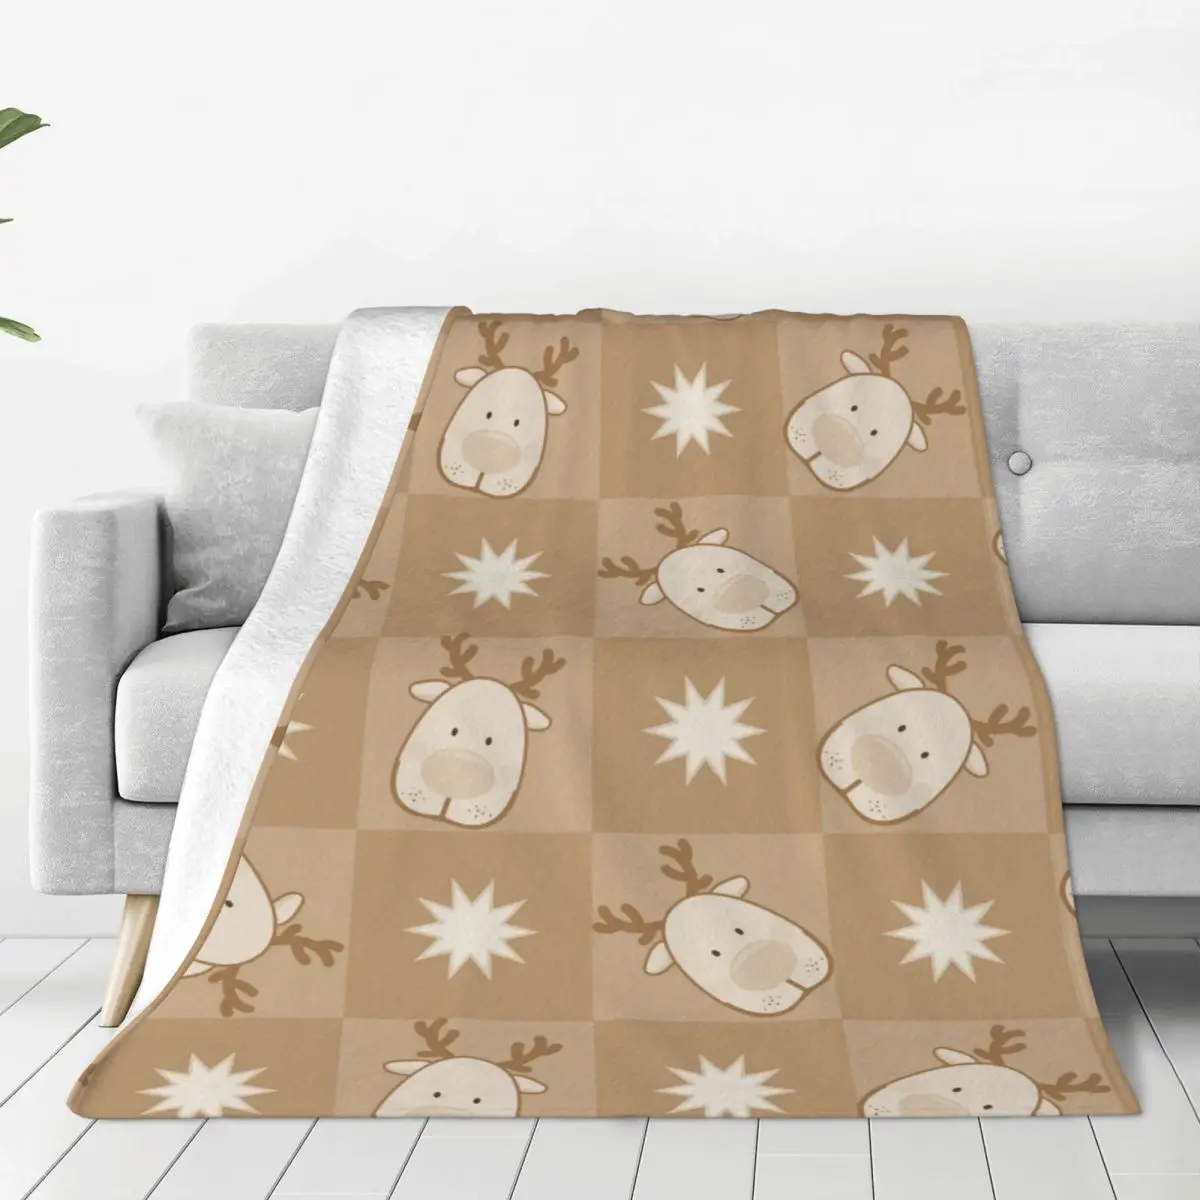 

Christmas Elk Blanket Ultra Soft Cozy Blooming Flowers Decorative Flannel Blanket All Season For Home Couch Bed Chair Travel